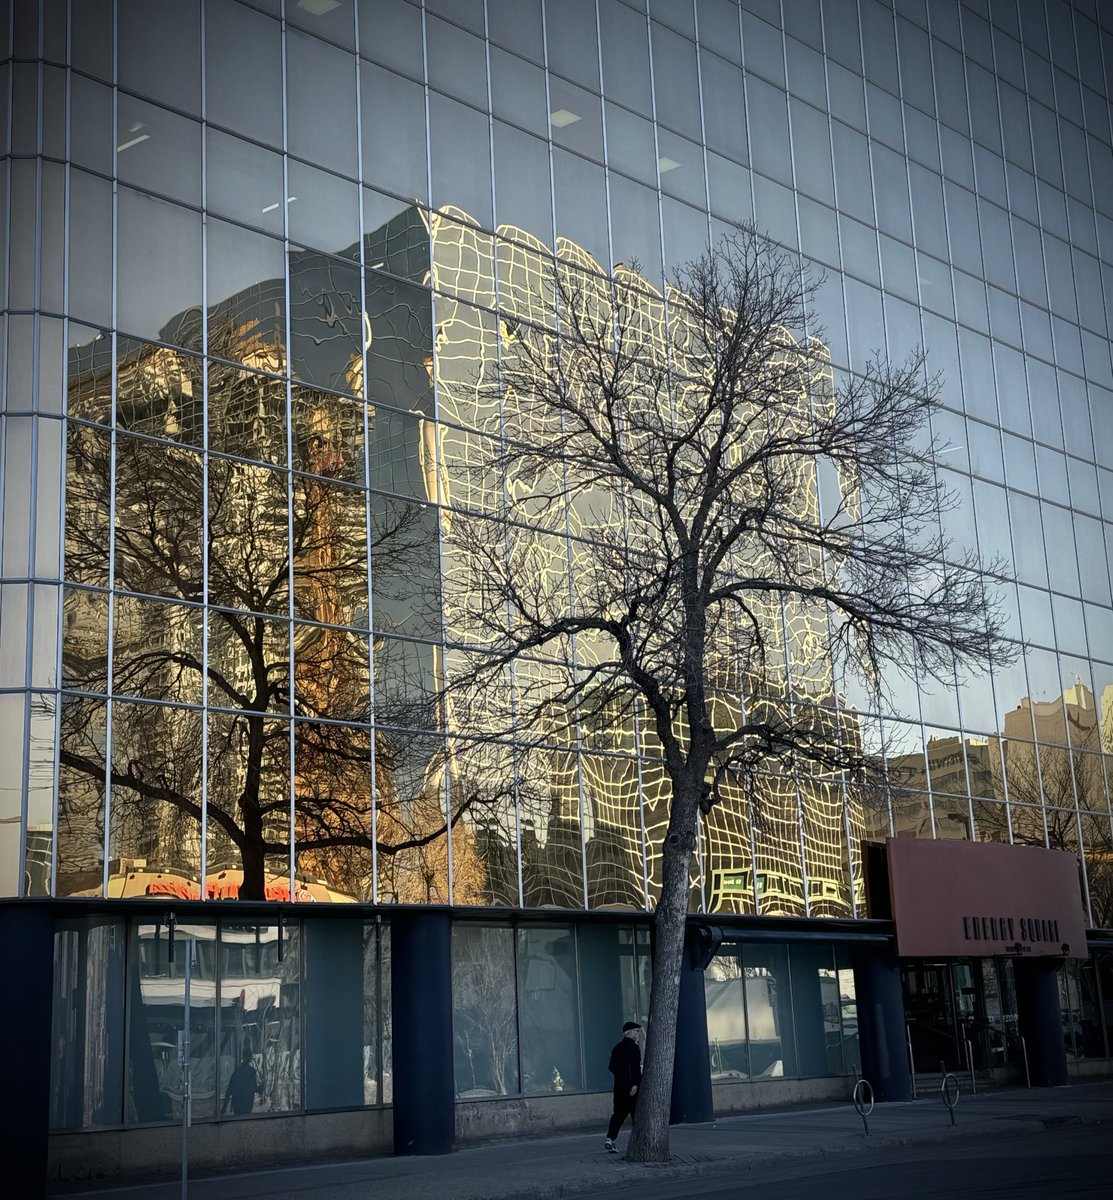 Seen in #yegdt this morning. Tree, building, reflection.😎